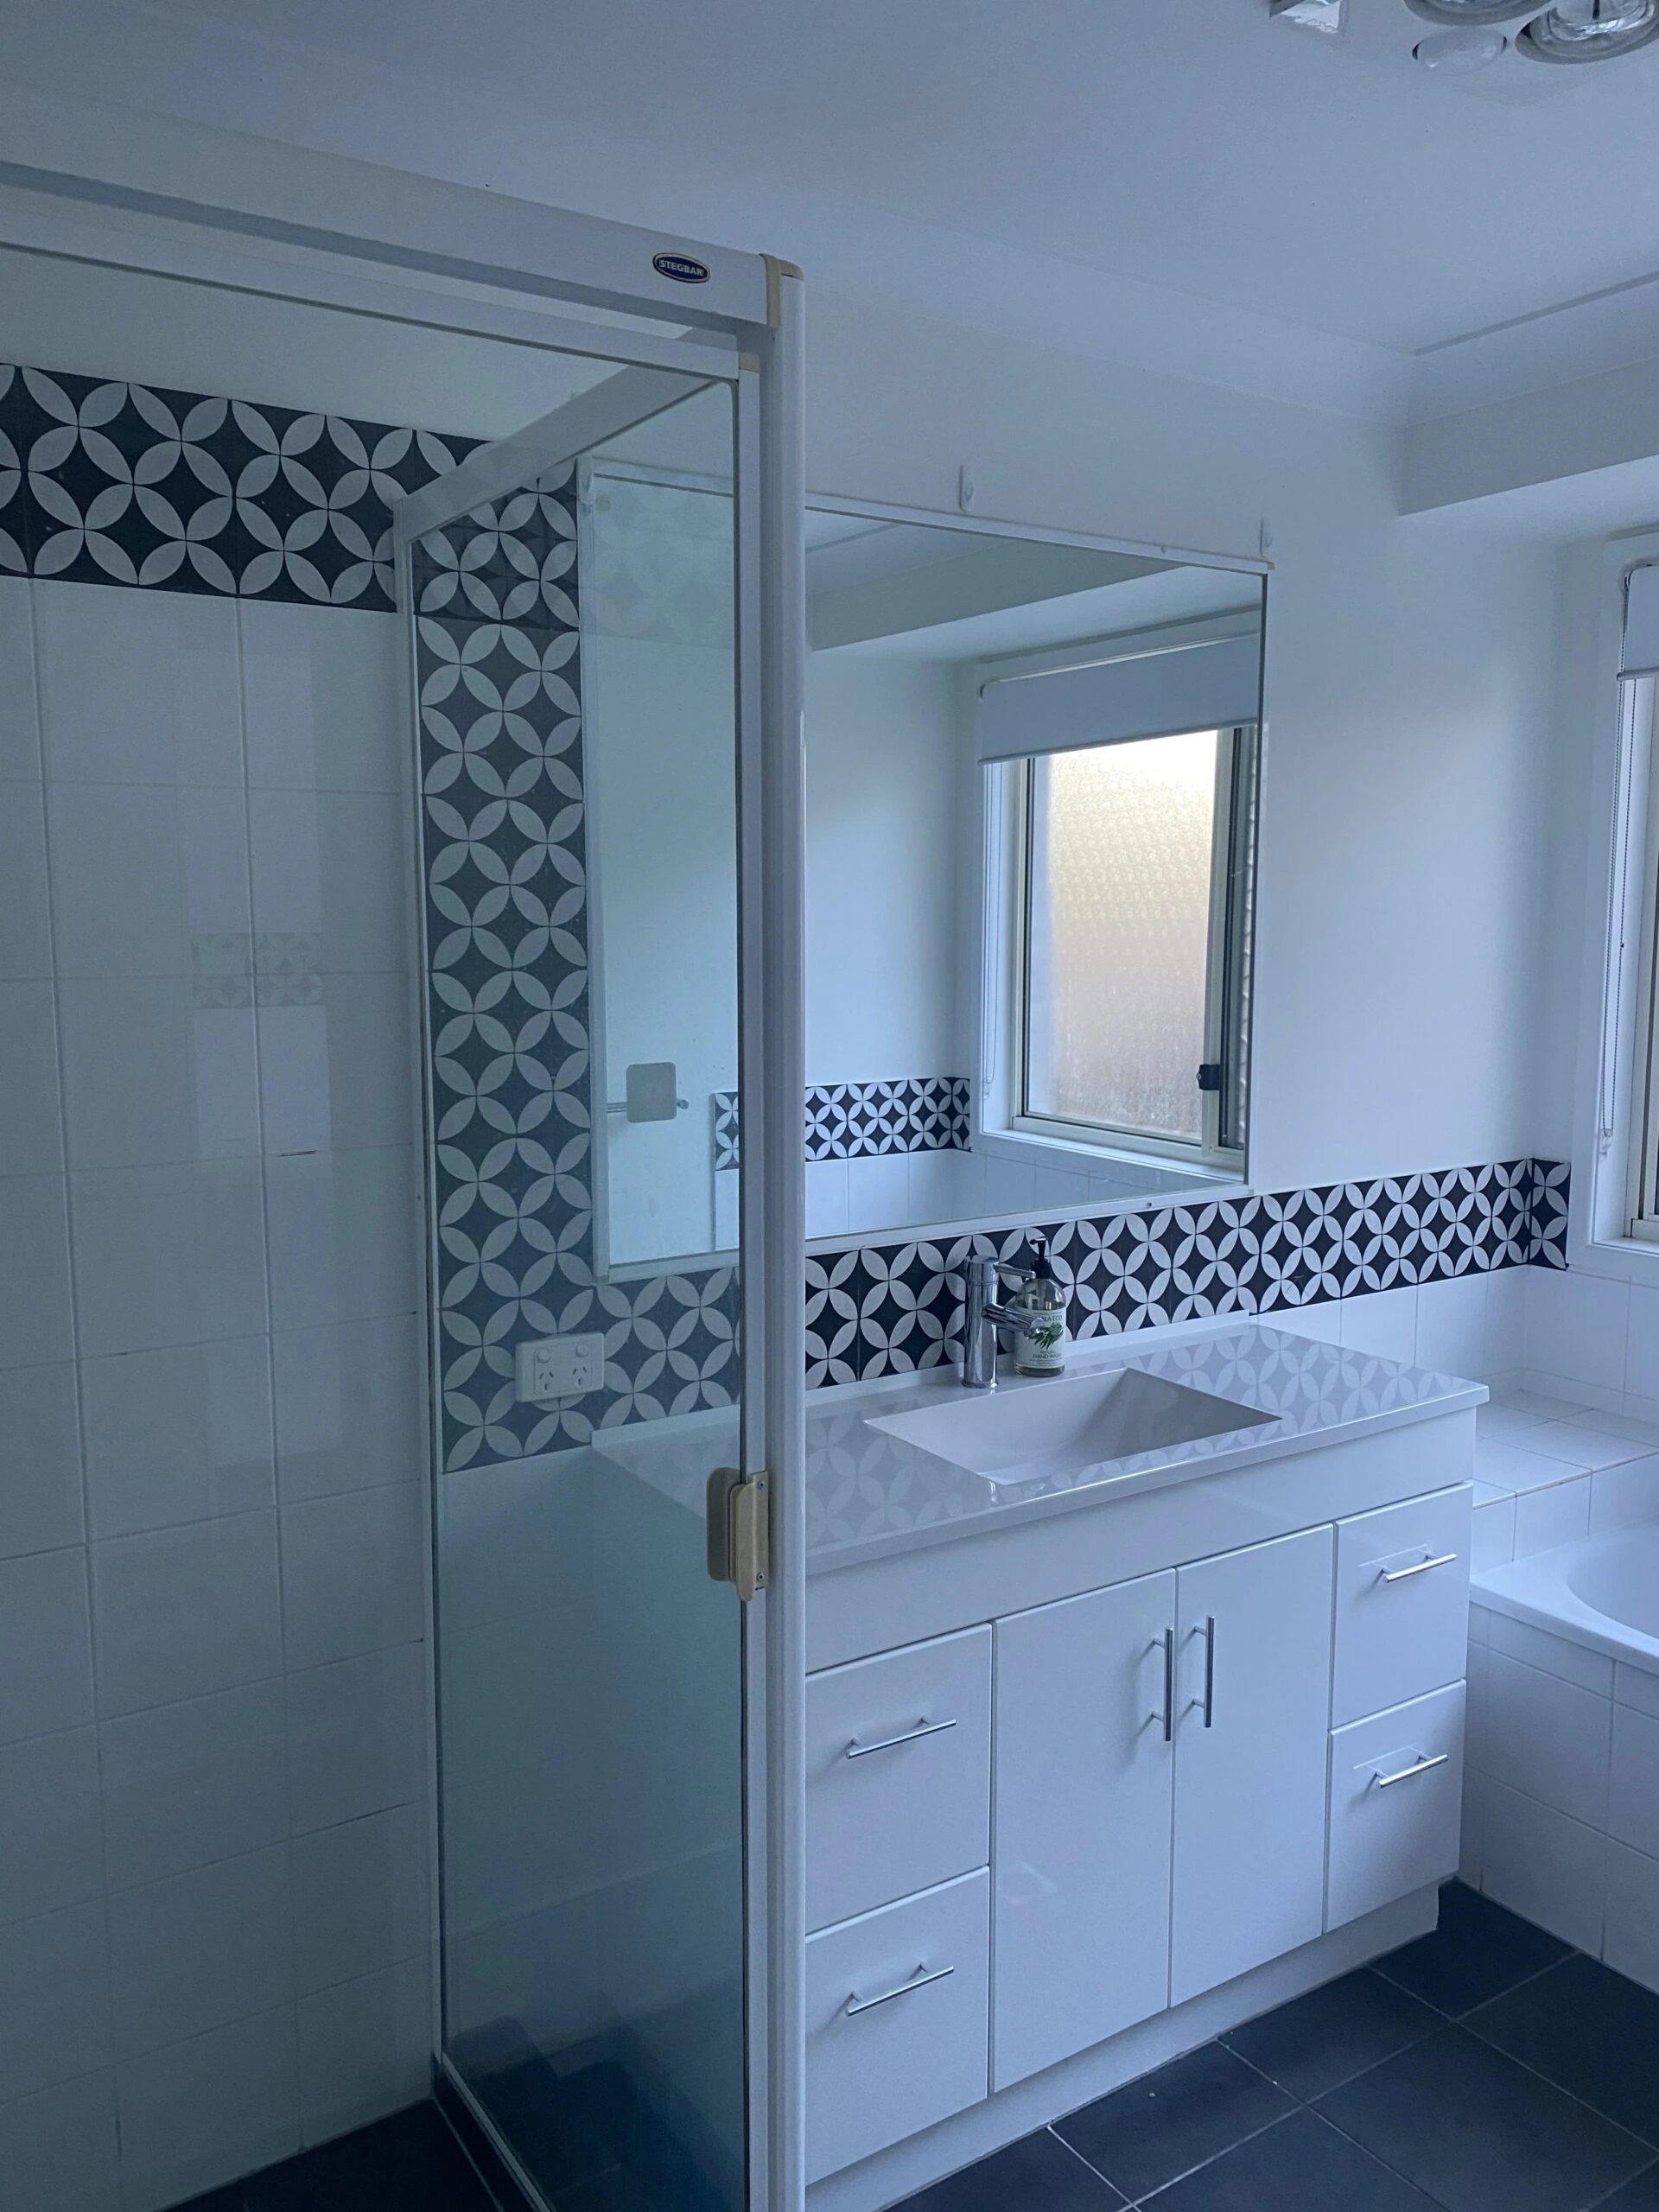 Before picture of a bathroom renovation, white units and blye patterned tiles.